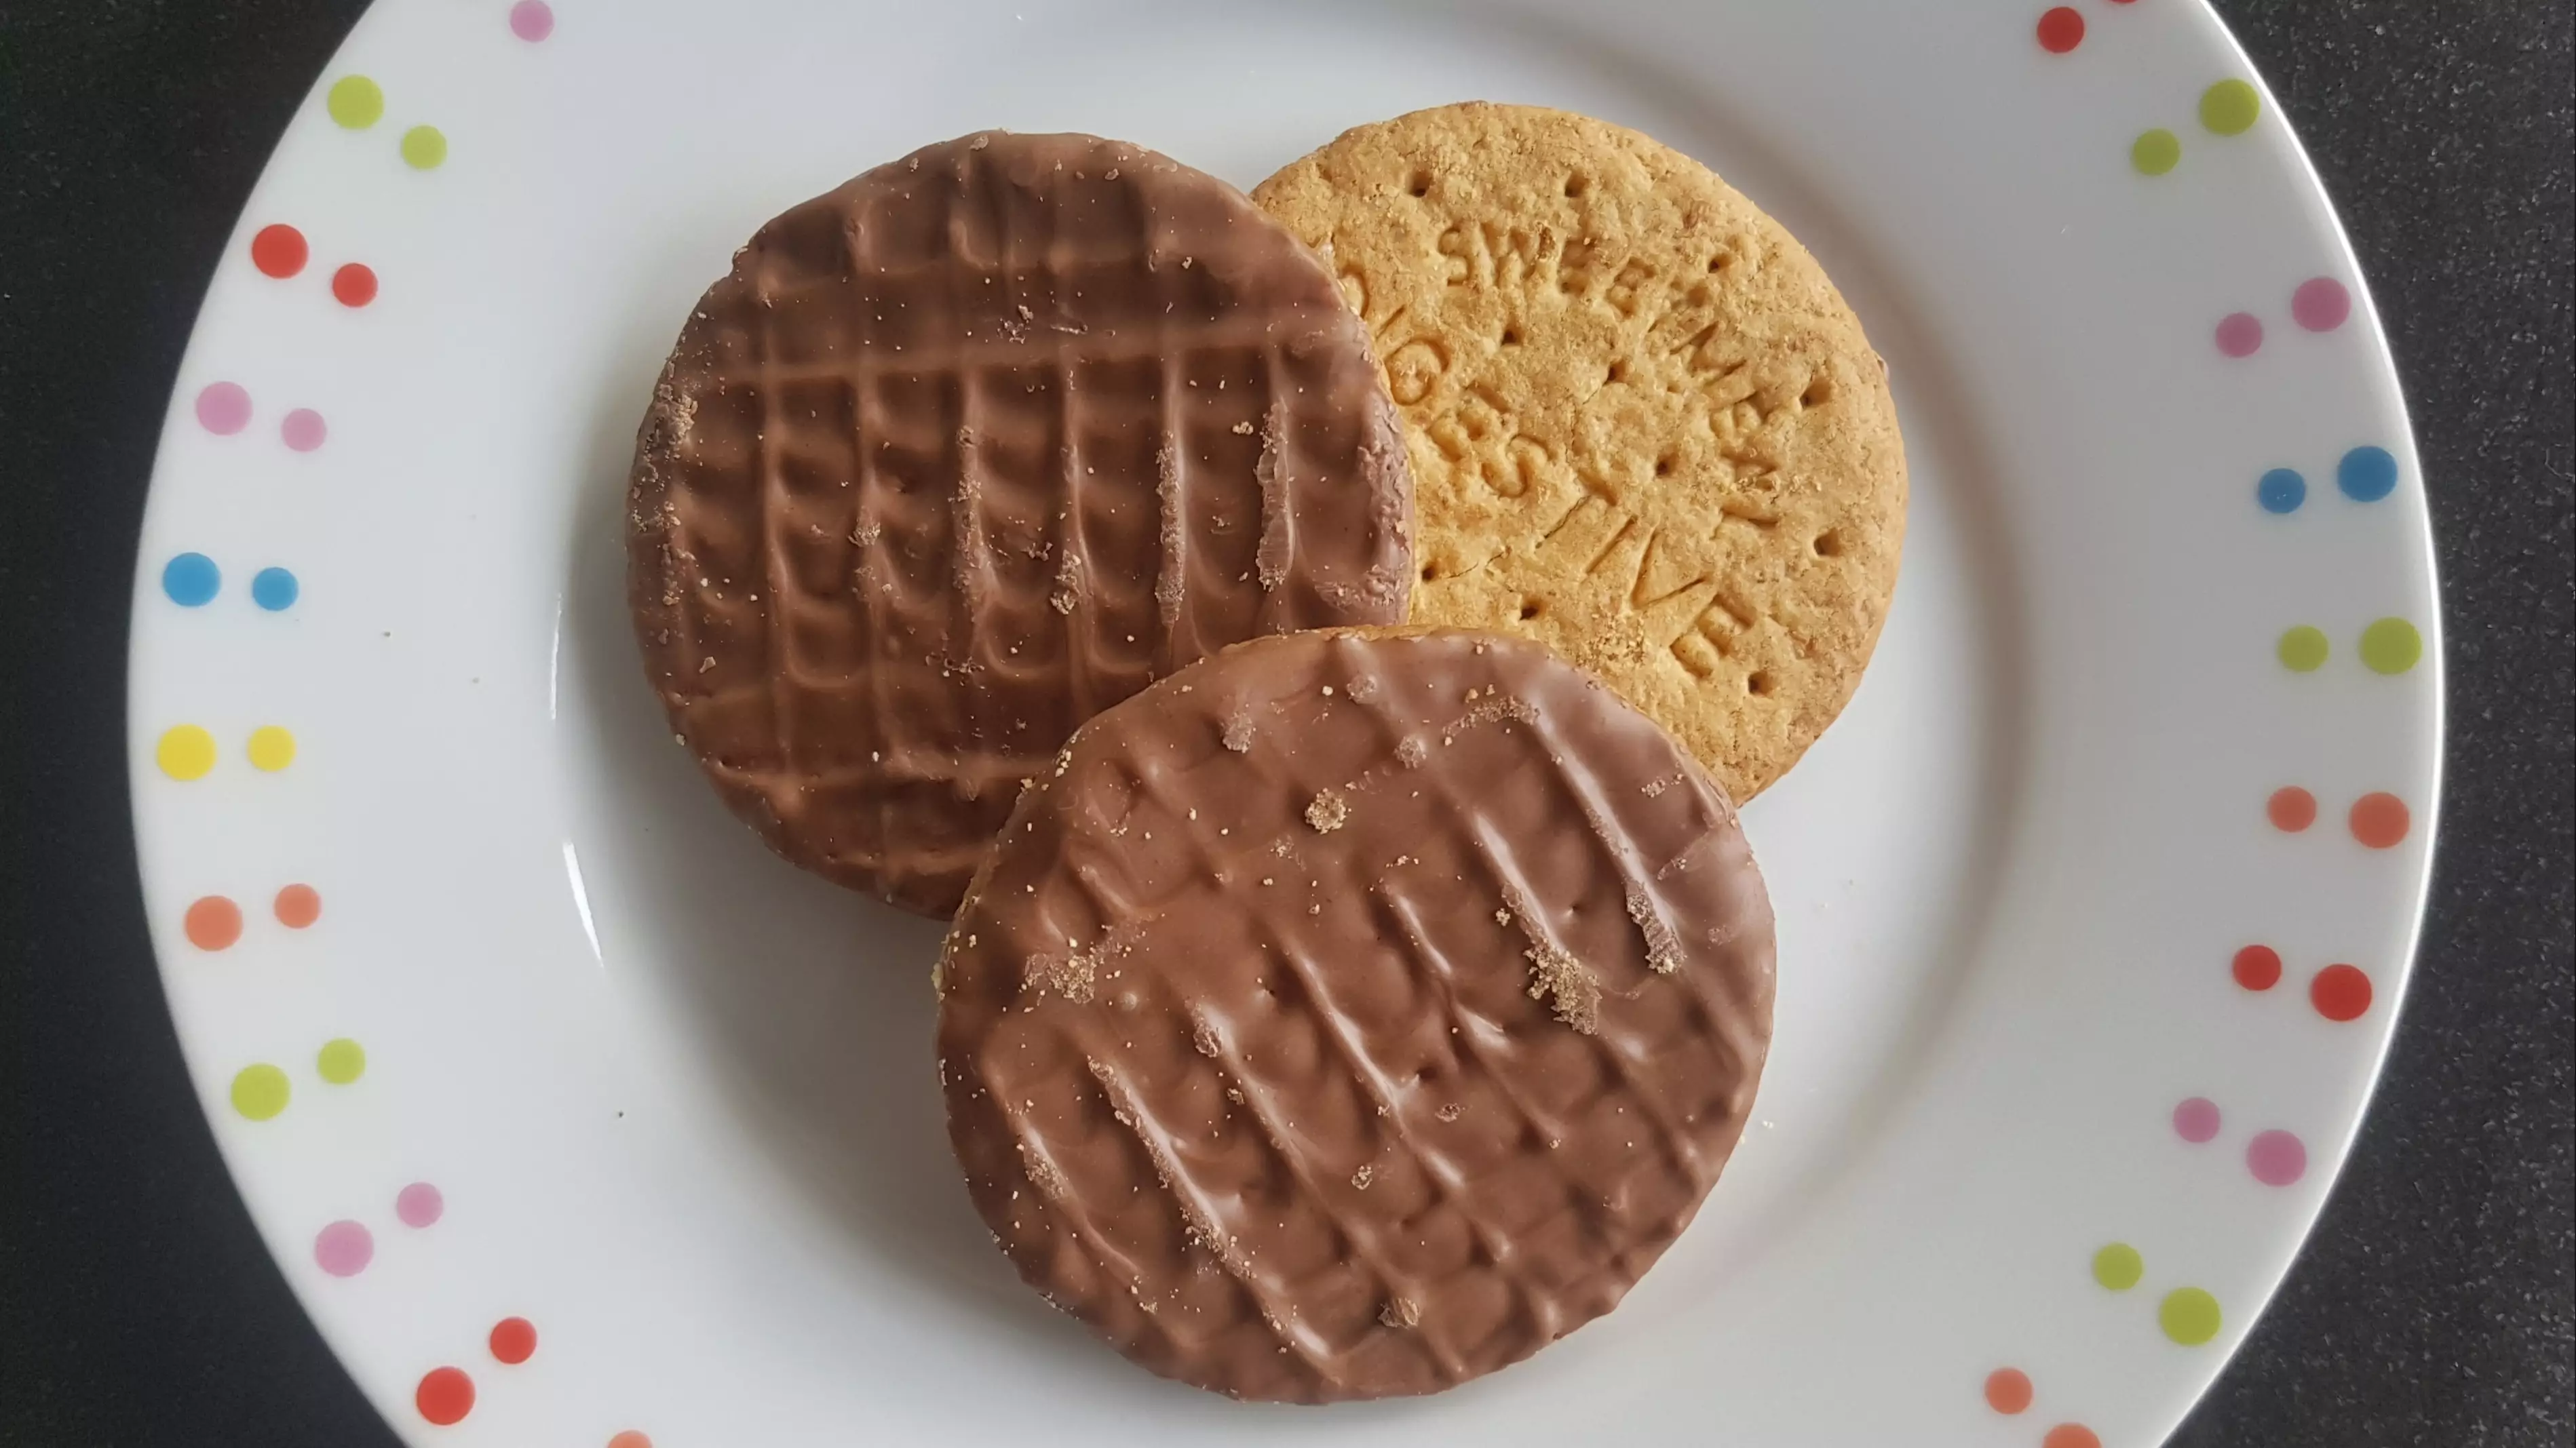 It Turns Out We've Been Eating Chocolate Digestives All Wrong